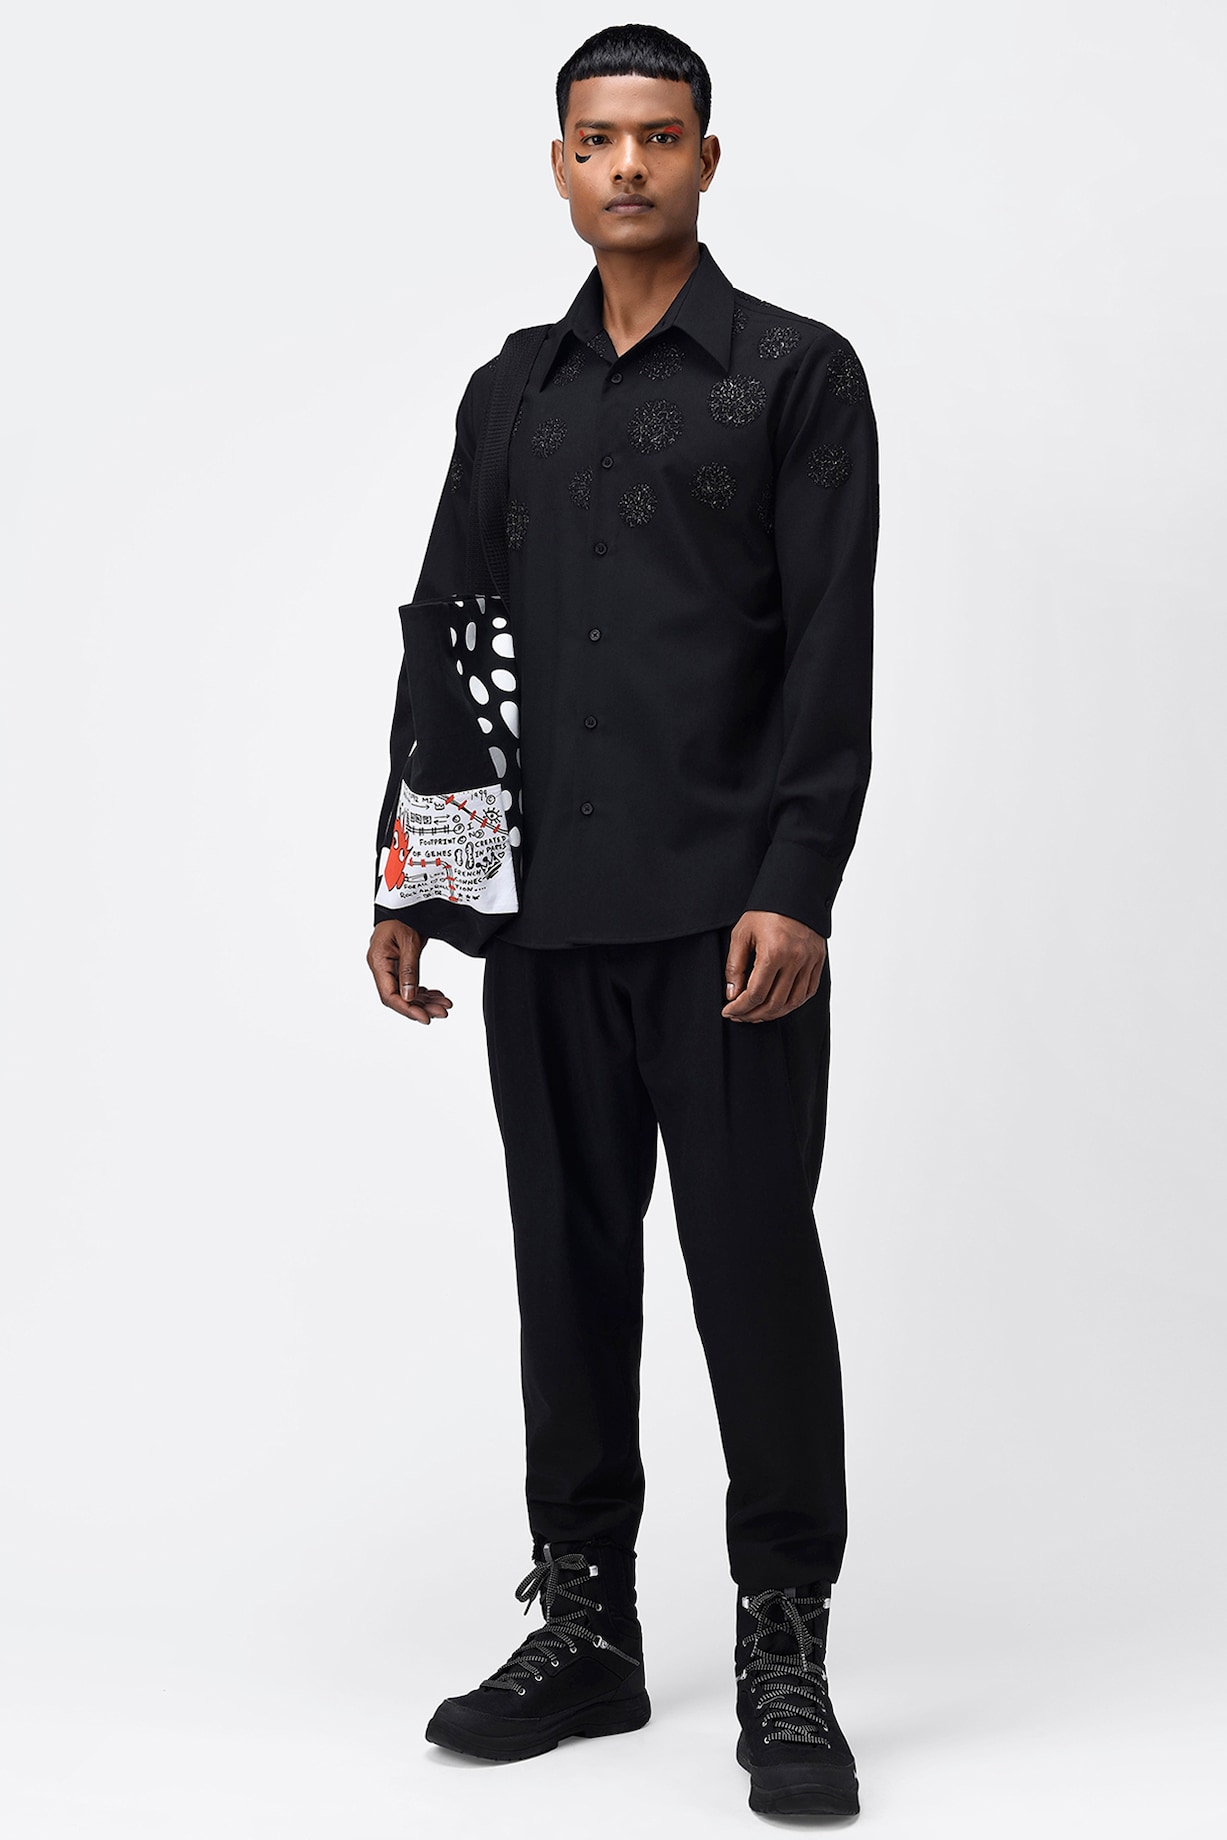 Black Embroidered Shirt by Genes Lecoanet Hemant Men